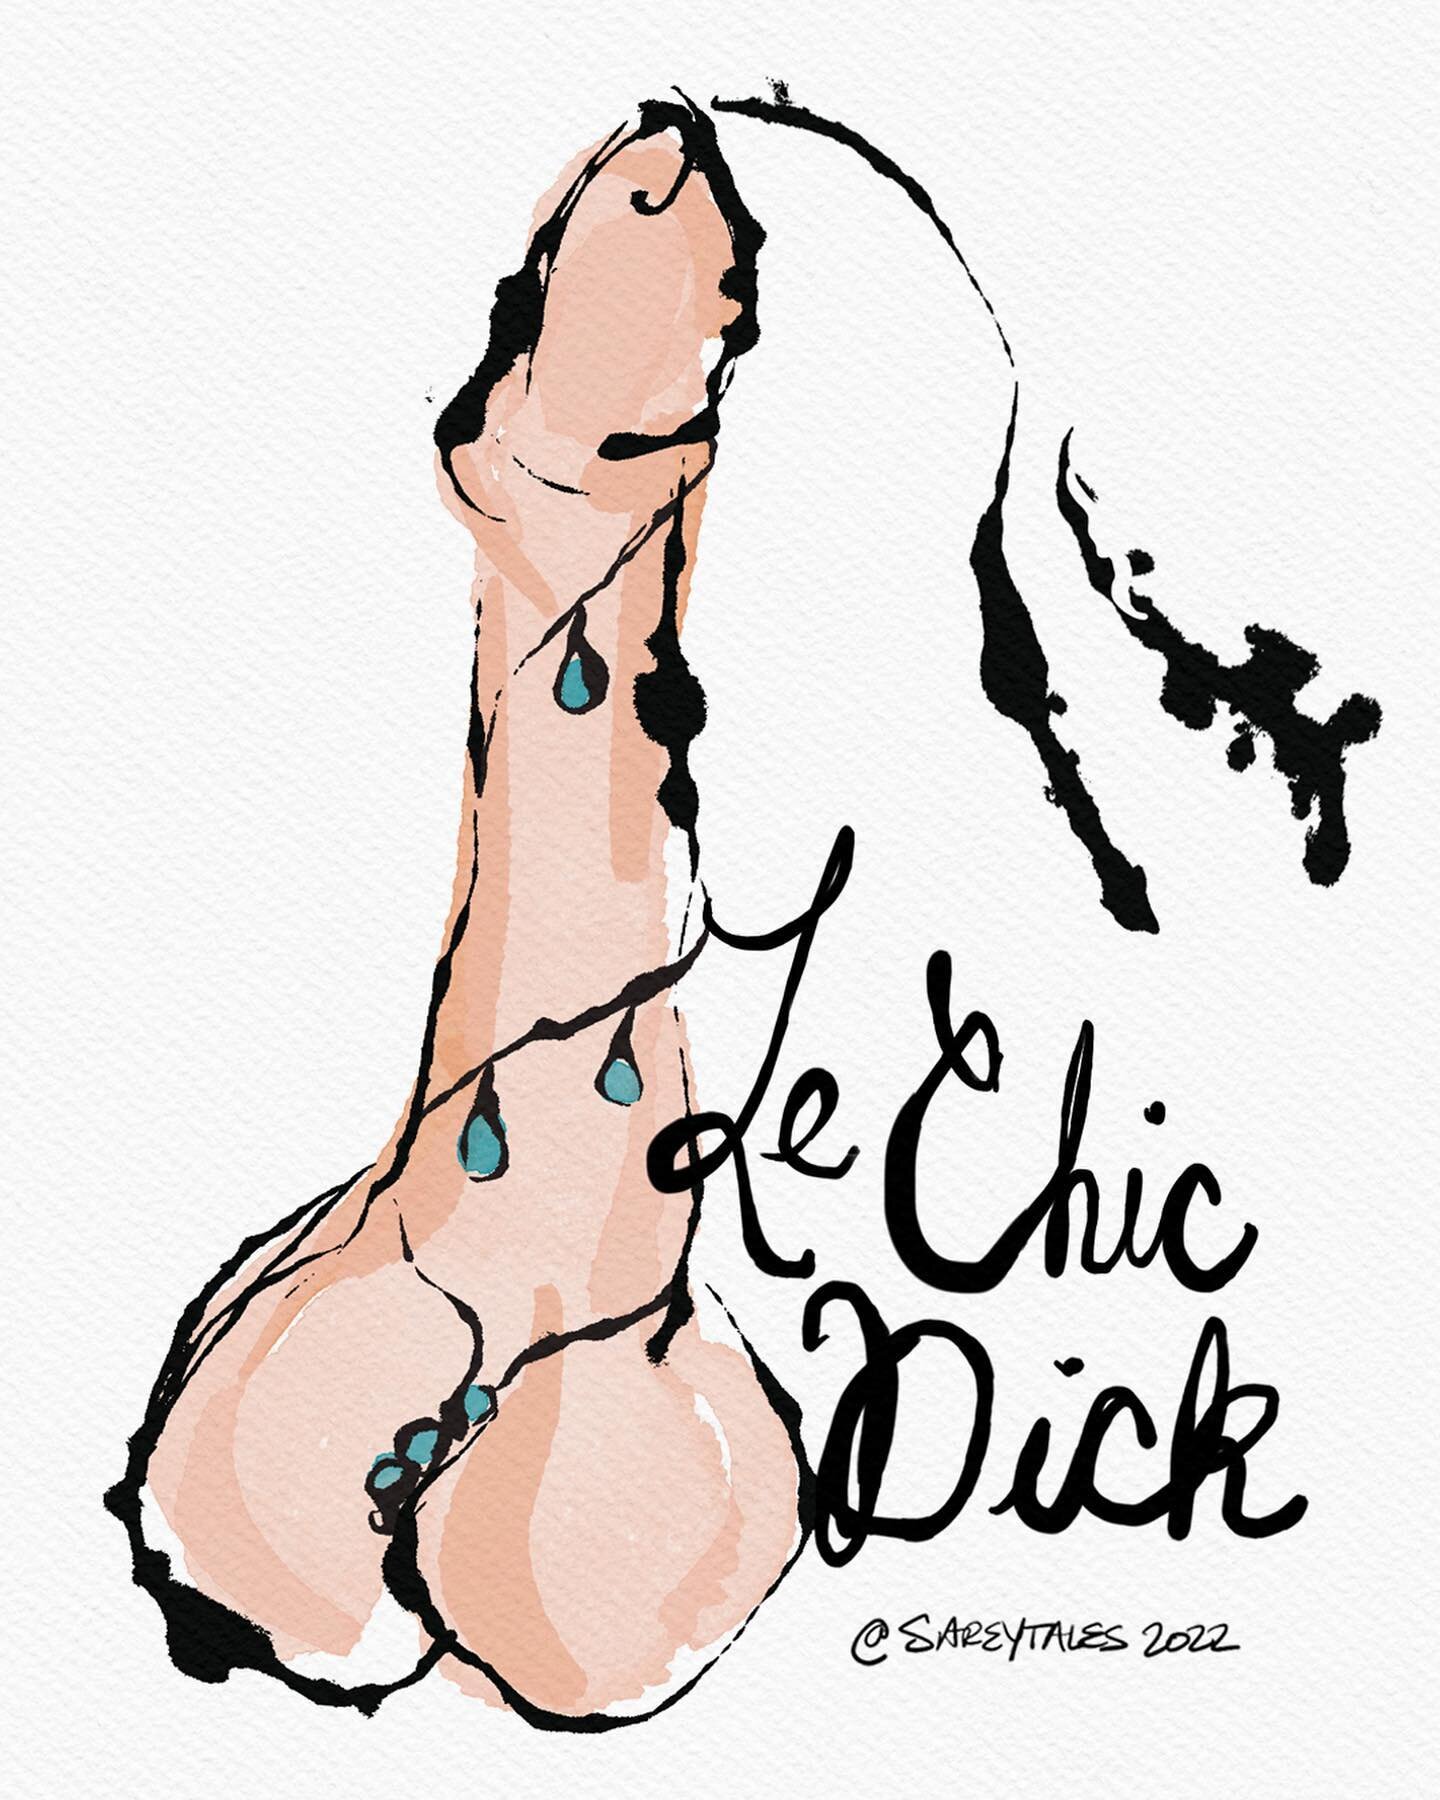 &ldquo;Le Chic Dick&rdquo; 💎🍆 (Digital illustration, 11x14, 2022 @sareytales)
.
This little gem will make it&rsquo;s debut at The Dirty Show XXIII in February. Tickets on sale now! Visit @dirtyshowdetroit for more info.
.
Le Chic, as I call him for